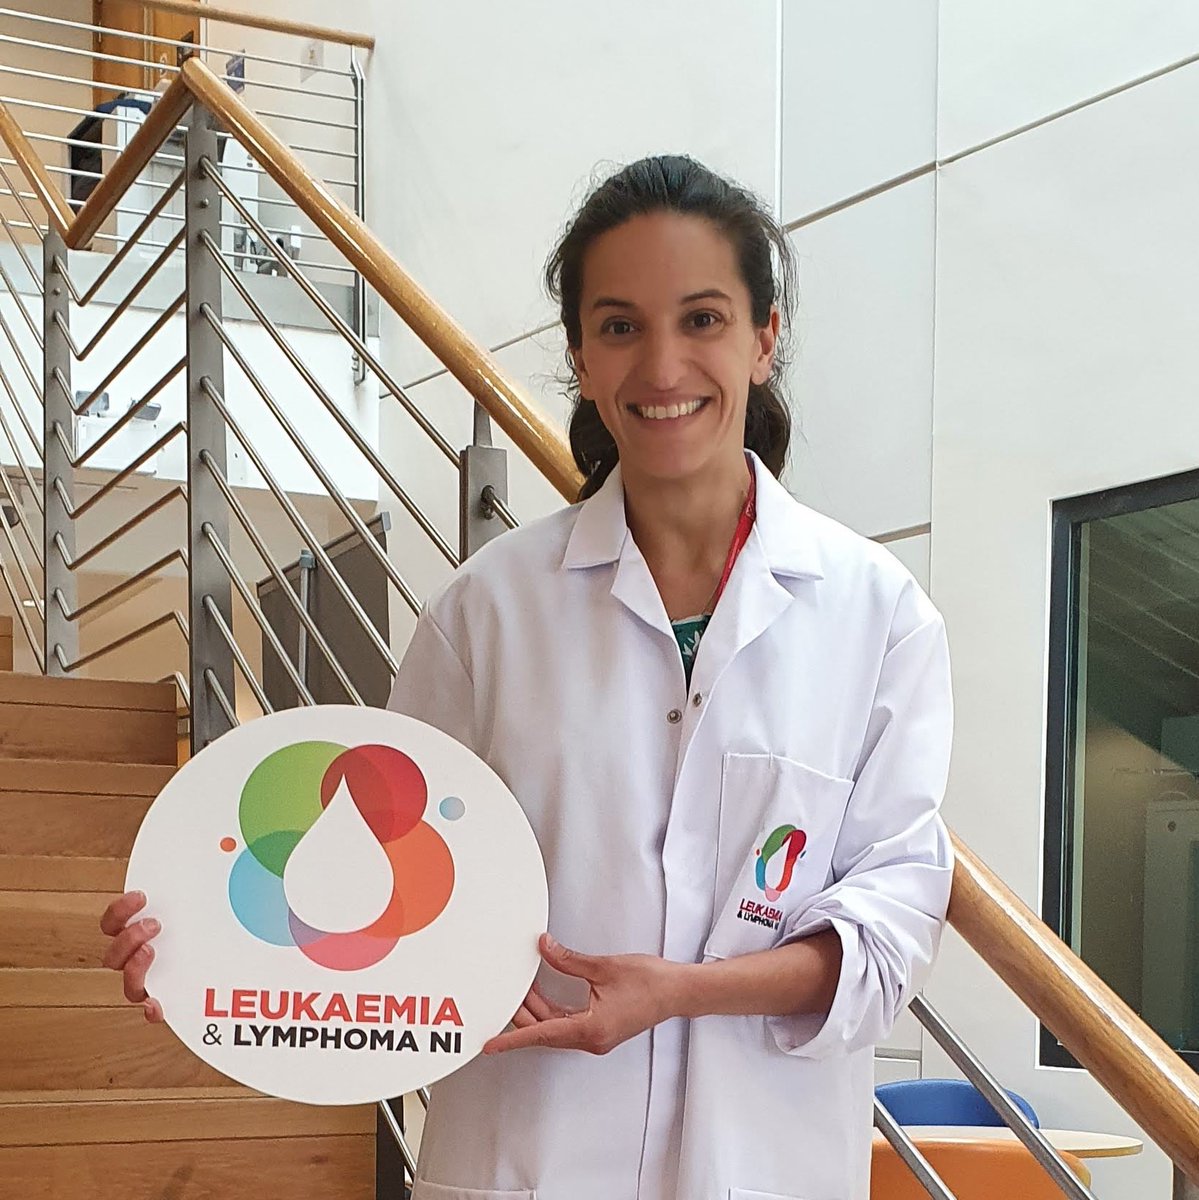 Leukaemia & Lymphoma are delighted to announce a grant of £48,700 to @DessiMalinova for a research project in to B cell lymphoma. 

Find out more about this vital and innovative research here: bit.ly/3FIl6fQ

#BeatingBloodCancerThroughResearch    
#BCellLymphoma